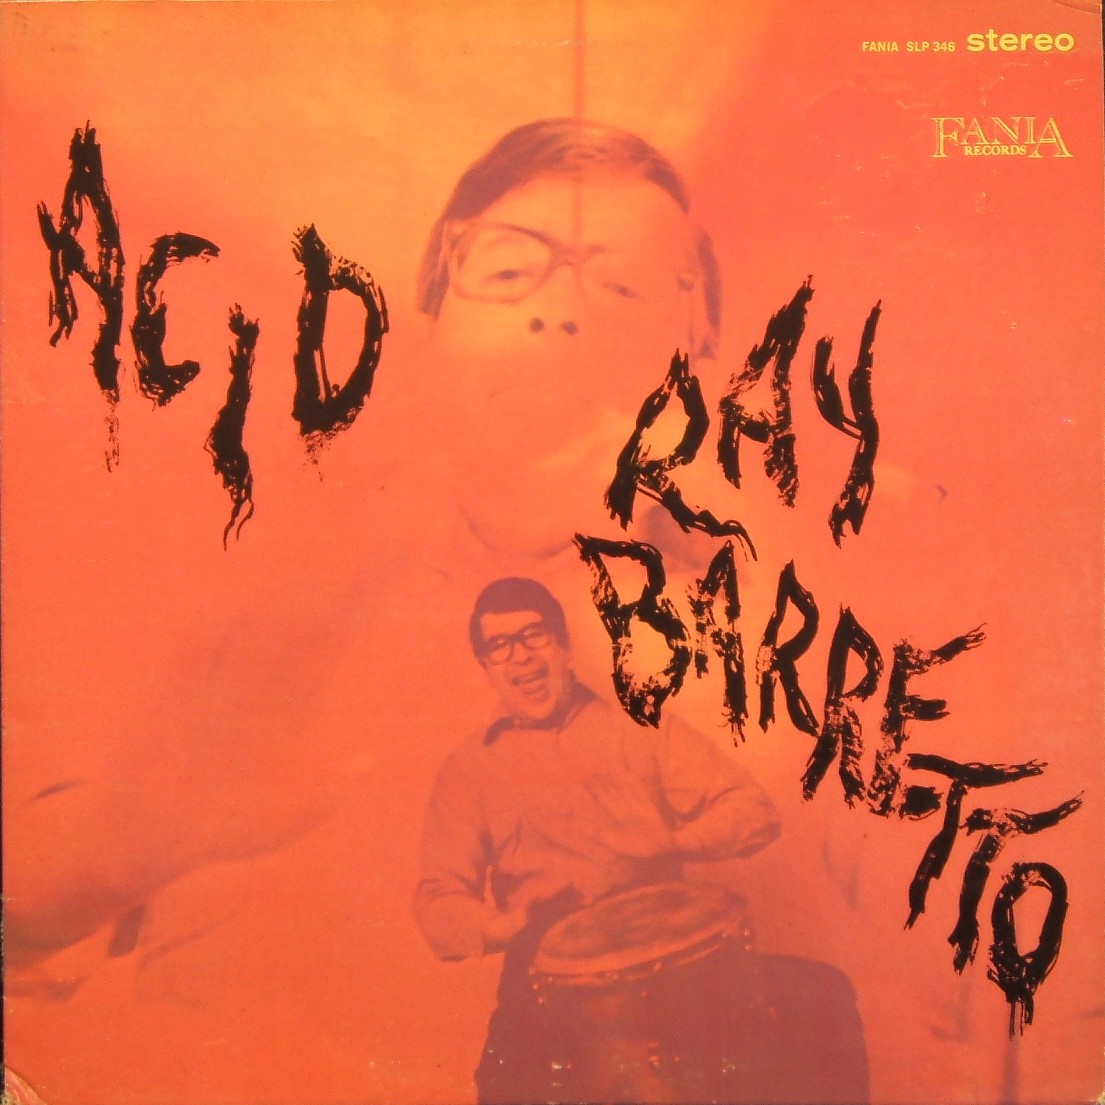 [ray-barretto-acid-stereo-front.JPG]